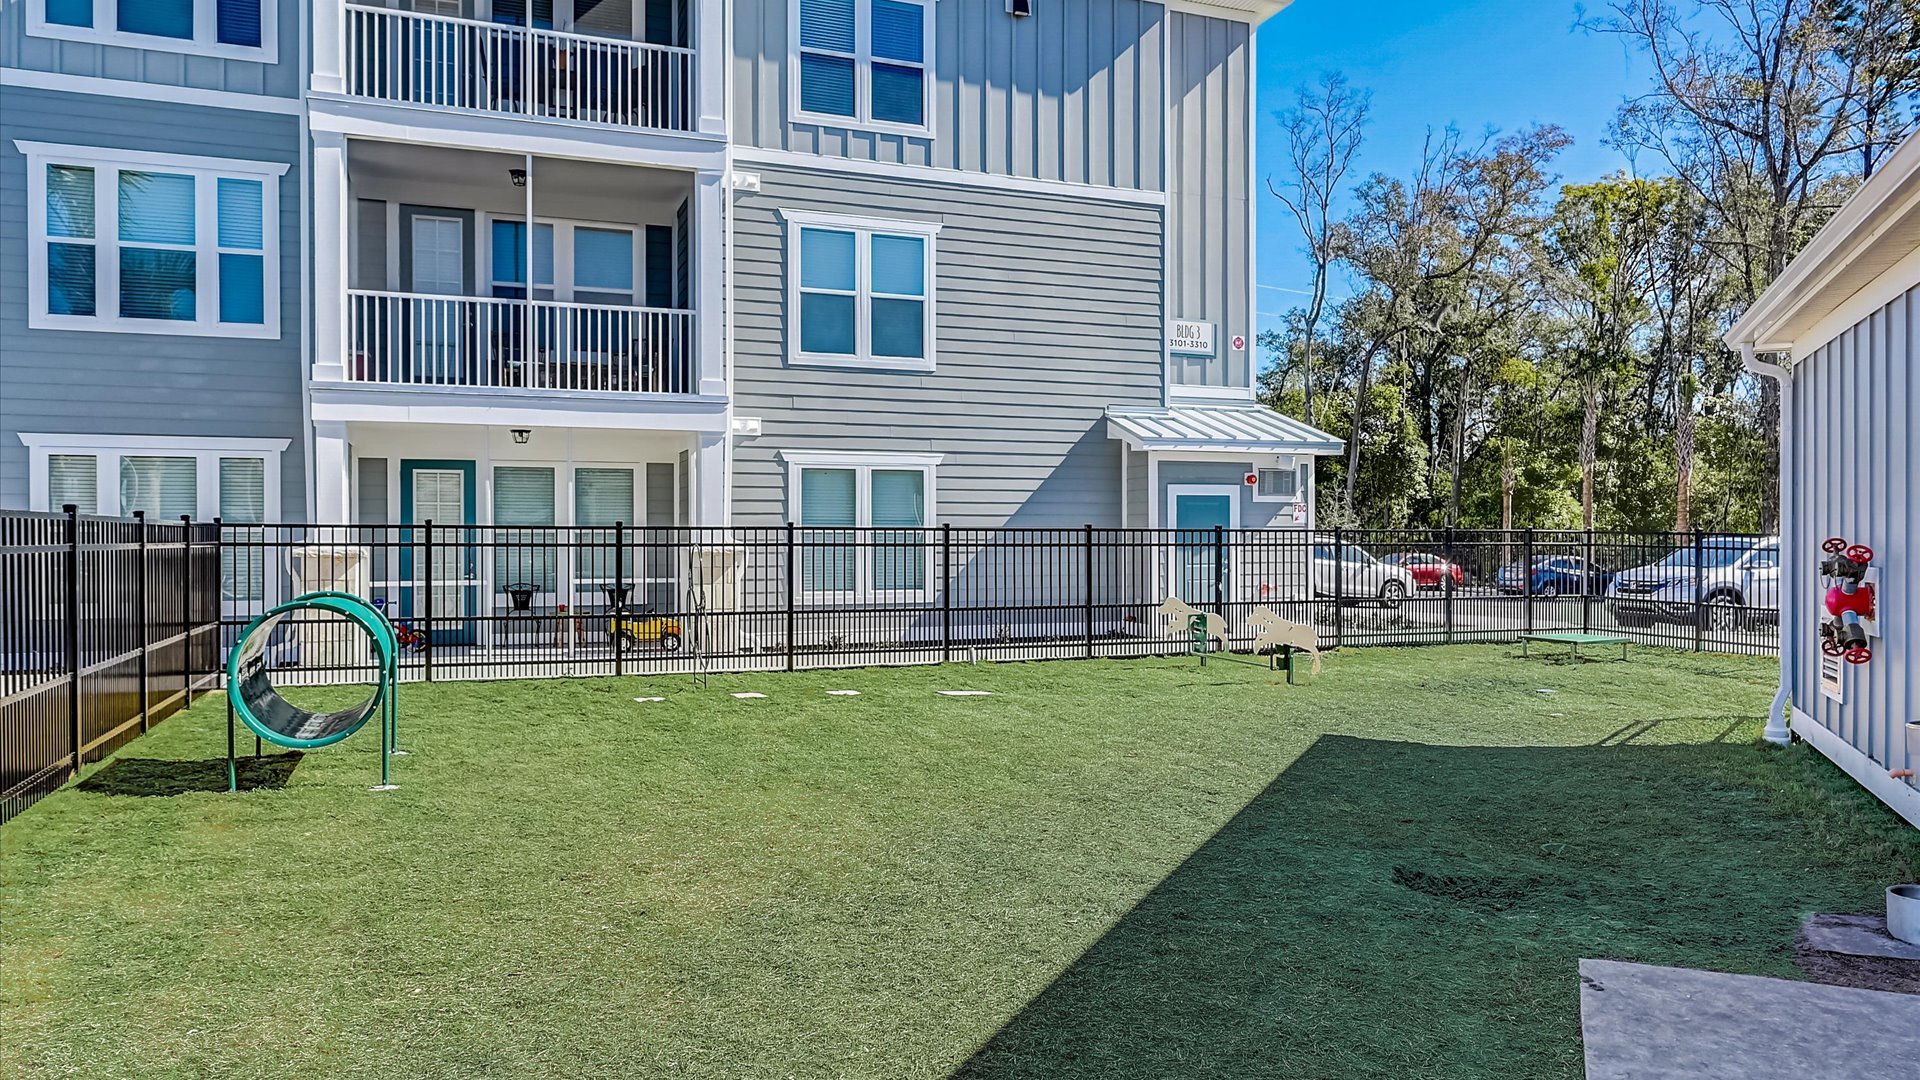 Large dog park amenity for small and large dogs Springs at Flagler Center Apartments in Jacksonville, FL